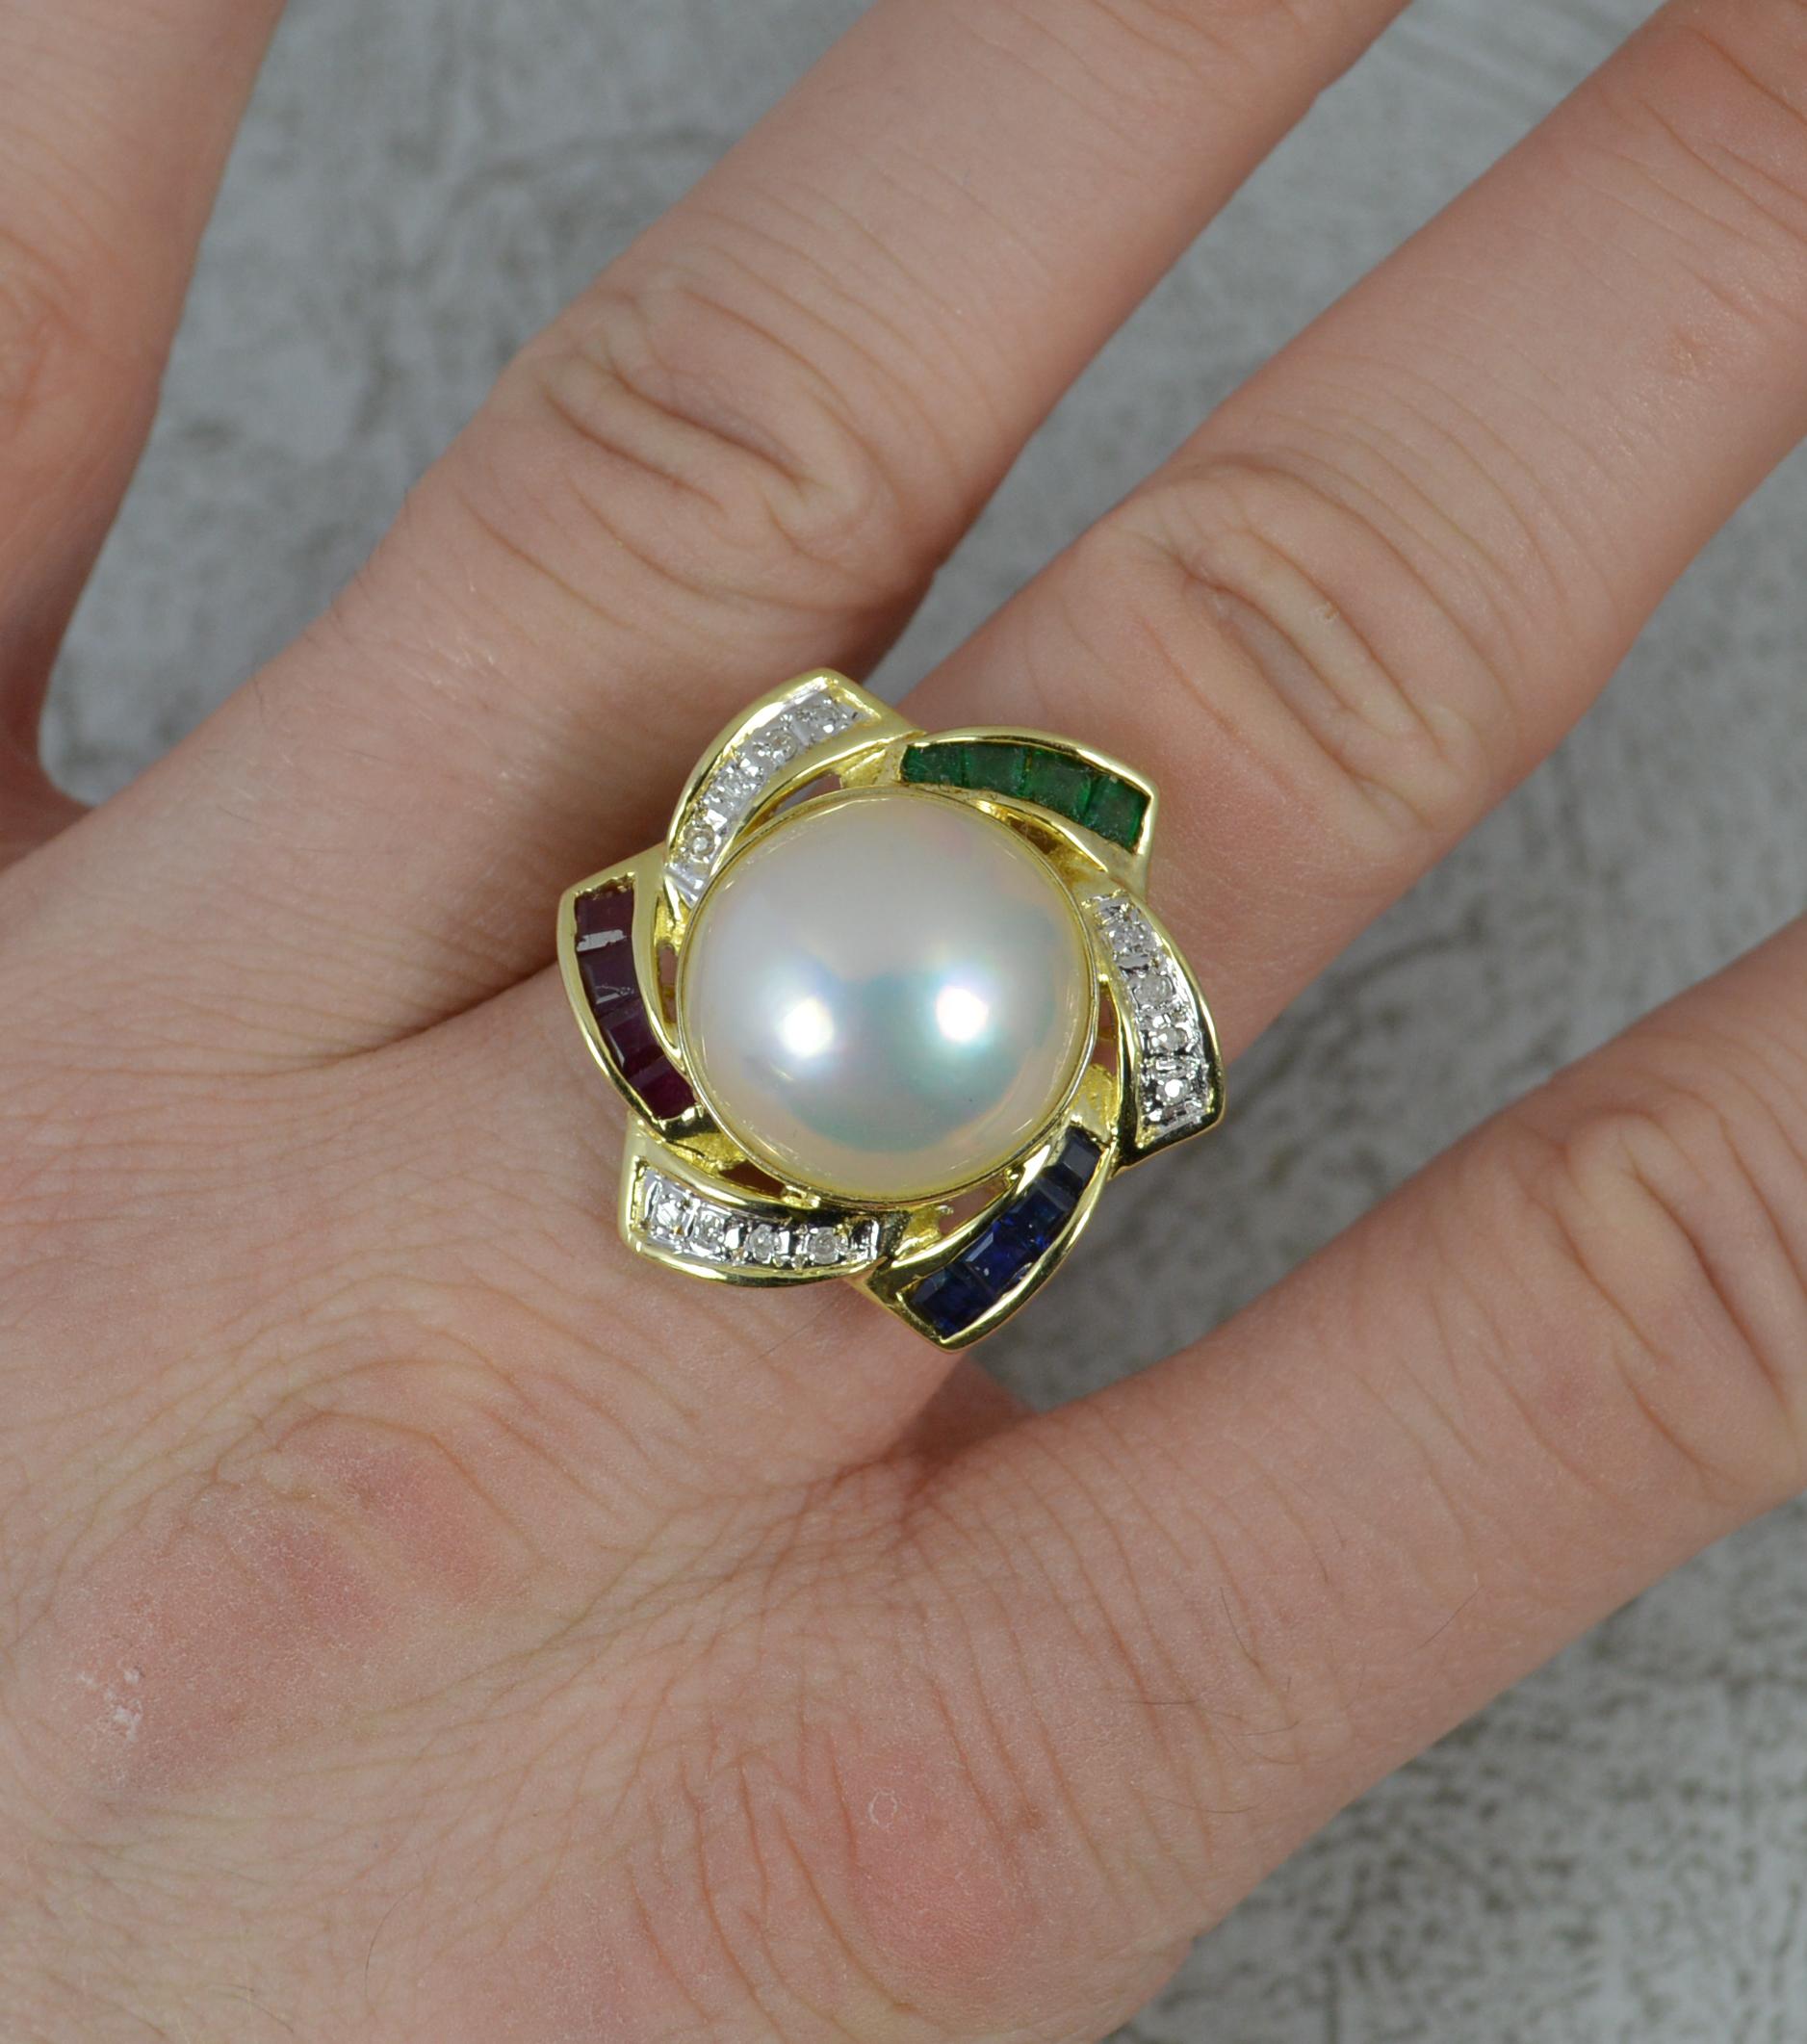 A superb Pearl, gemstone and diamond cluster ring.
Solid 14 carat yellow gold example.
Designed with a large Mabe Pearl to the centre, 15mm diameter. Surrounding are alternating sections of round brilliant cut diamonds and princess cut ruby, emerald